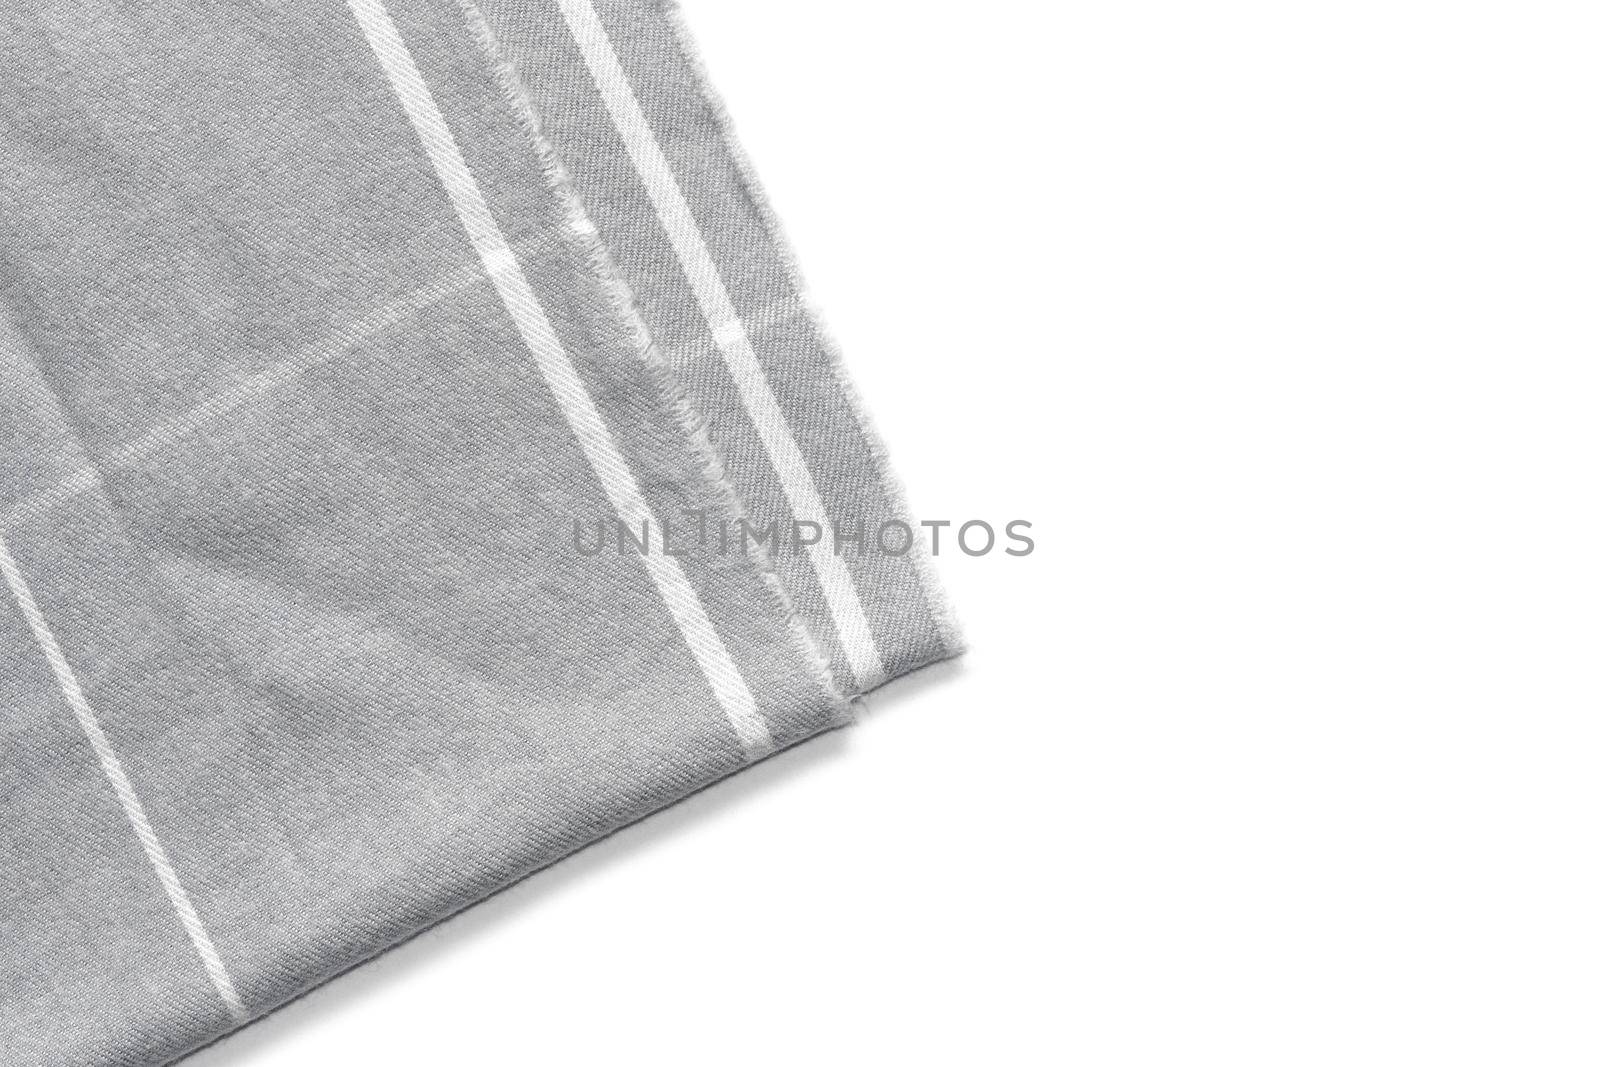 A piece of gray checked fabric is isolated on a white background with an area for text